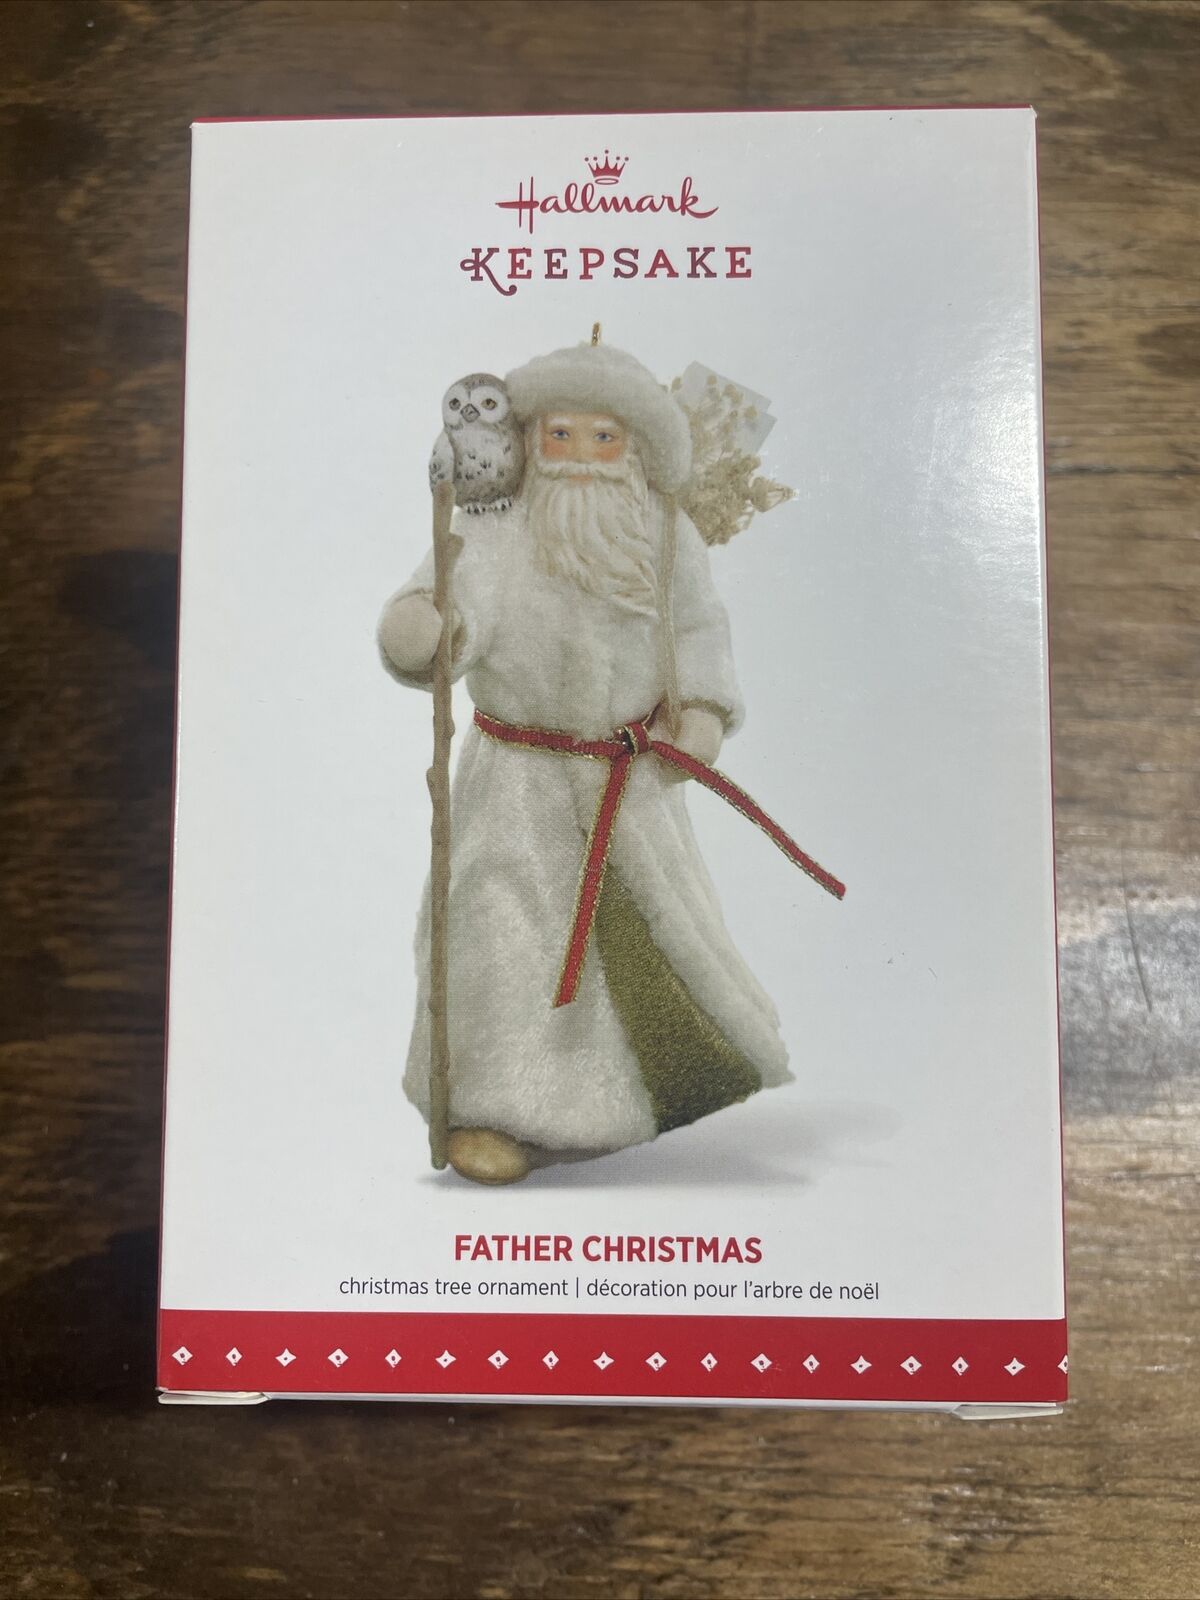 Collectible Father Christmas 2015 Hallmark Keepsake Ornament #12 In Series.- New